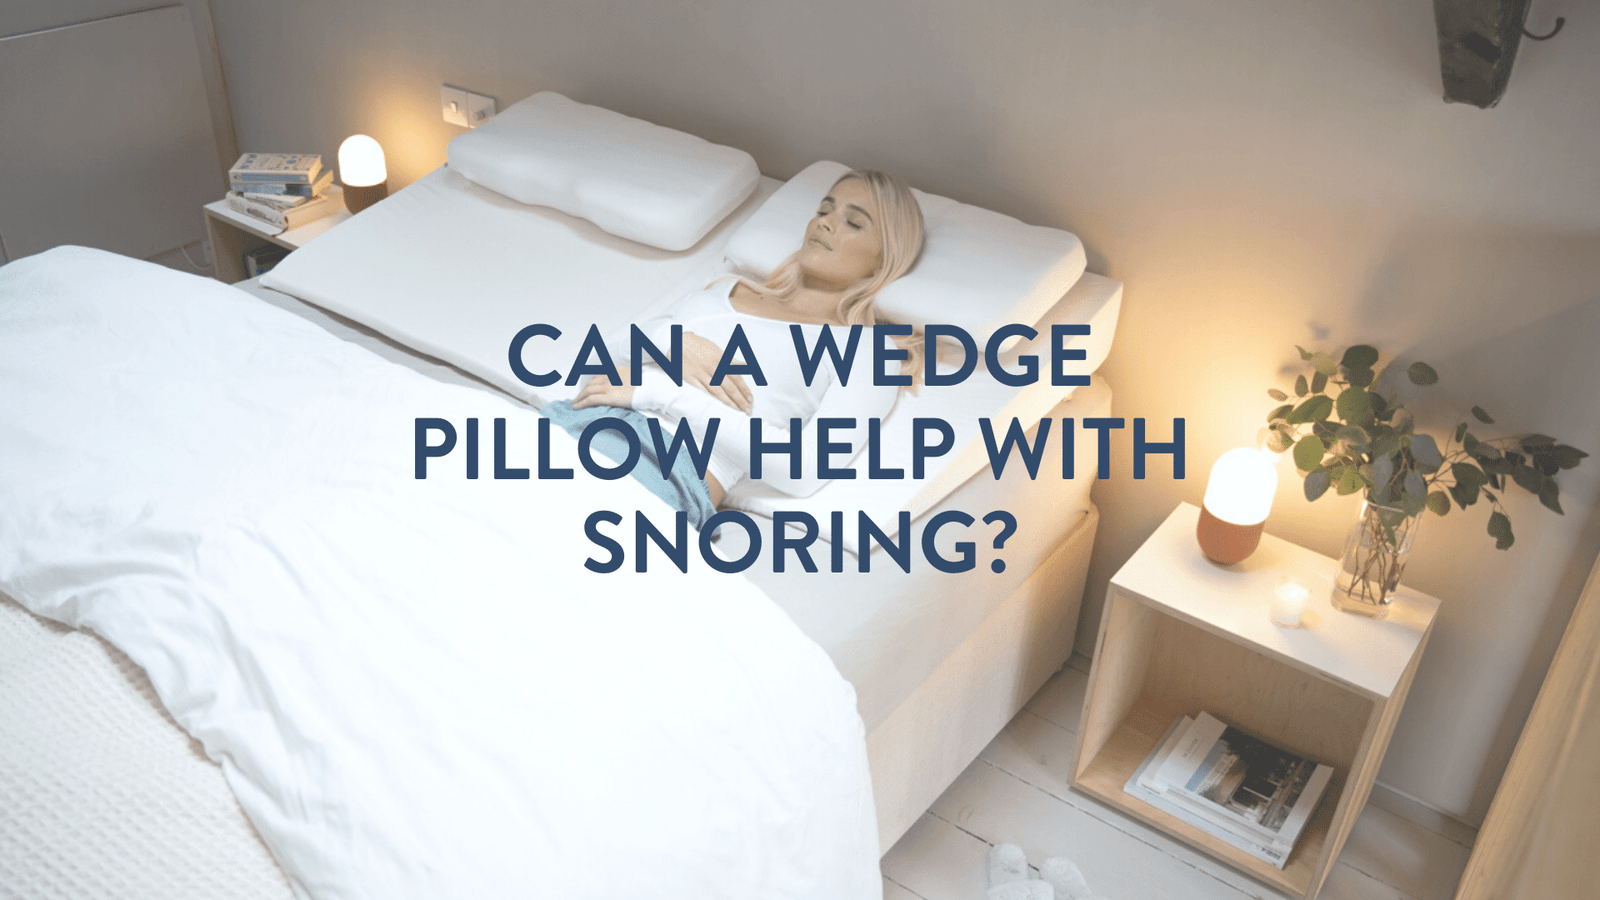 wedge pillow to help with snoring review does it work